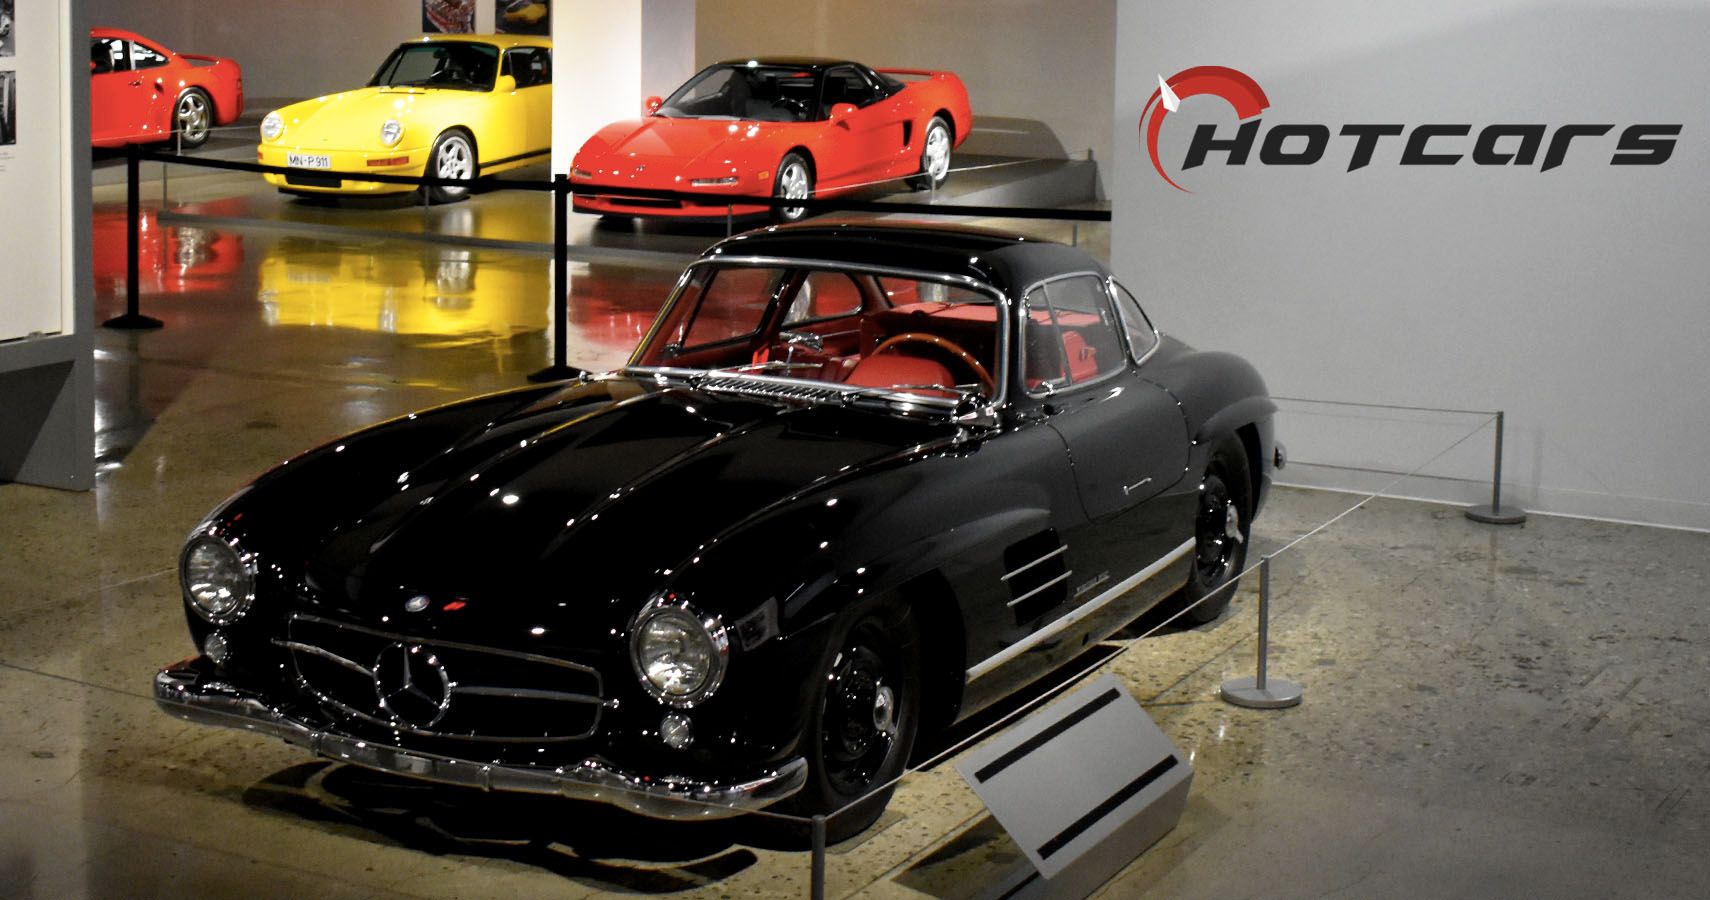 EXCLUSIVE: HotCars Previews The Petersen Museum's New Supercar Exhibit